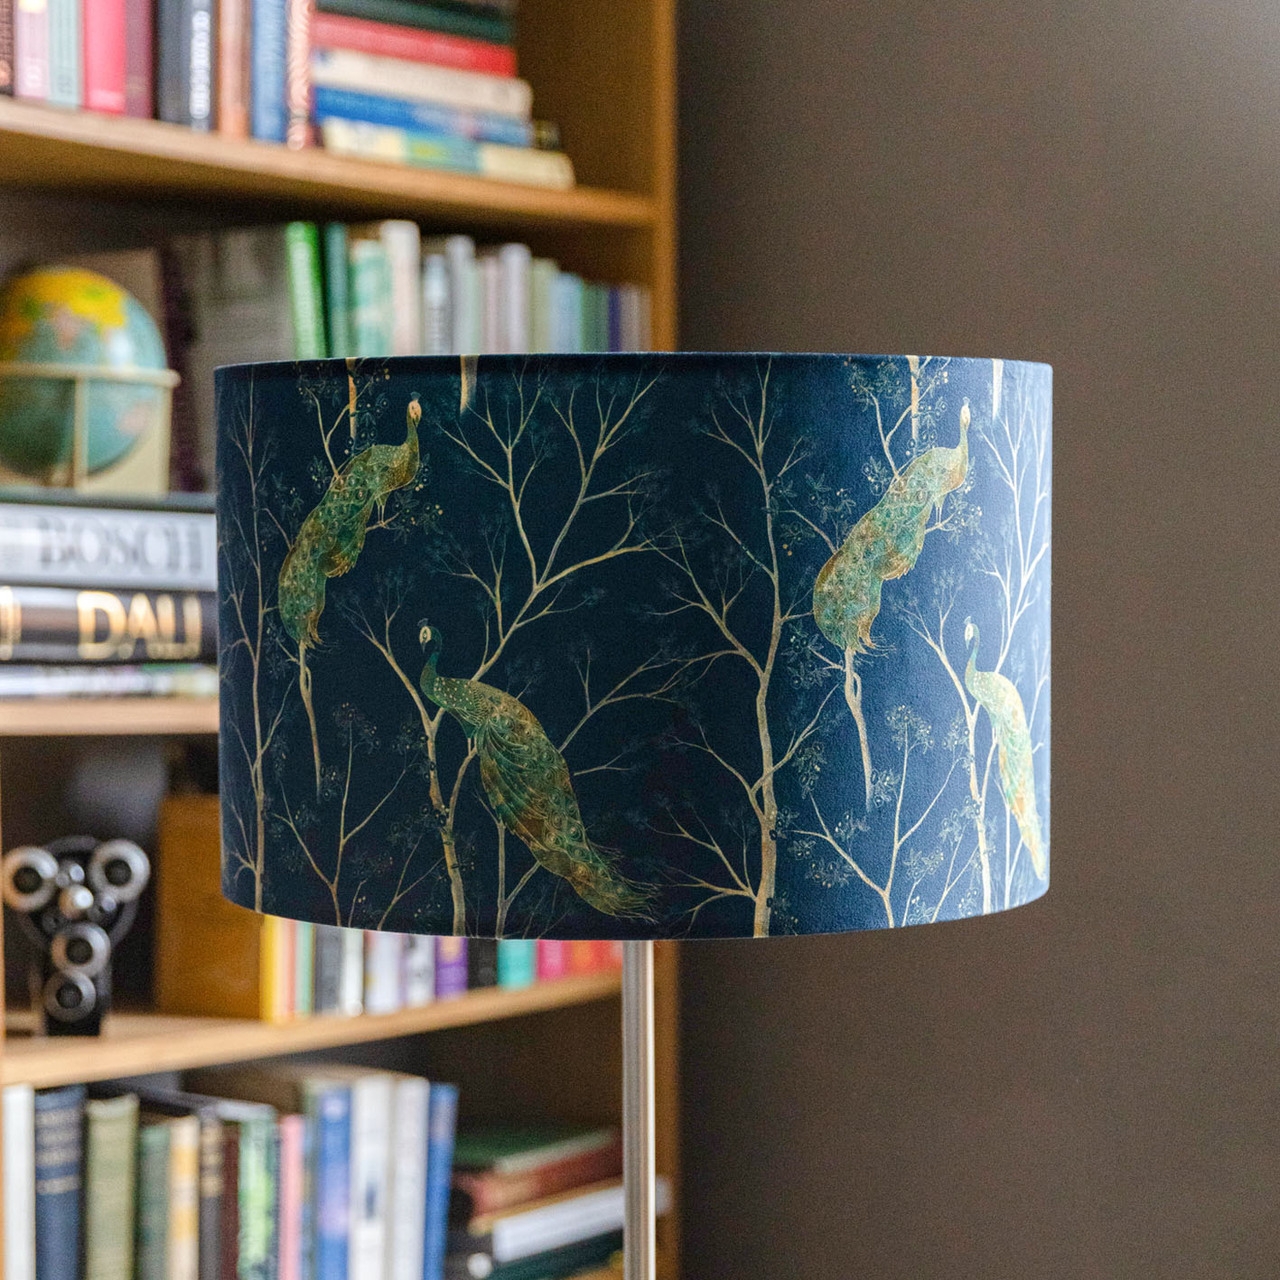 Celina Digby Luxury Soft-Touch Velvet Lampshade – Available for Ceiling Light, Standard Lamp or Table Peacock Navy Light (40cm)